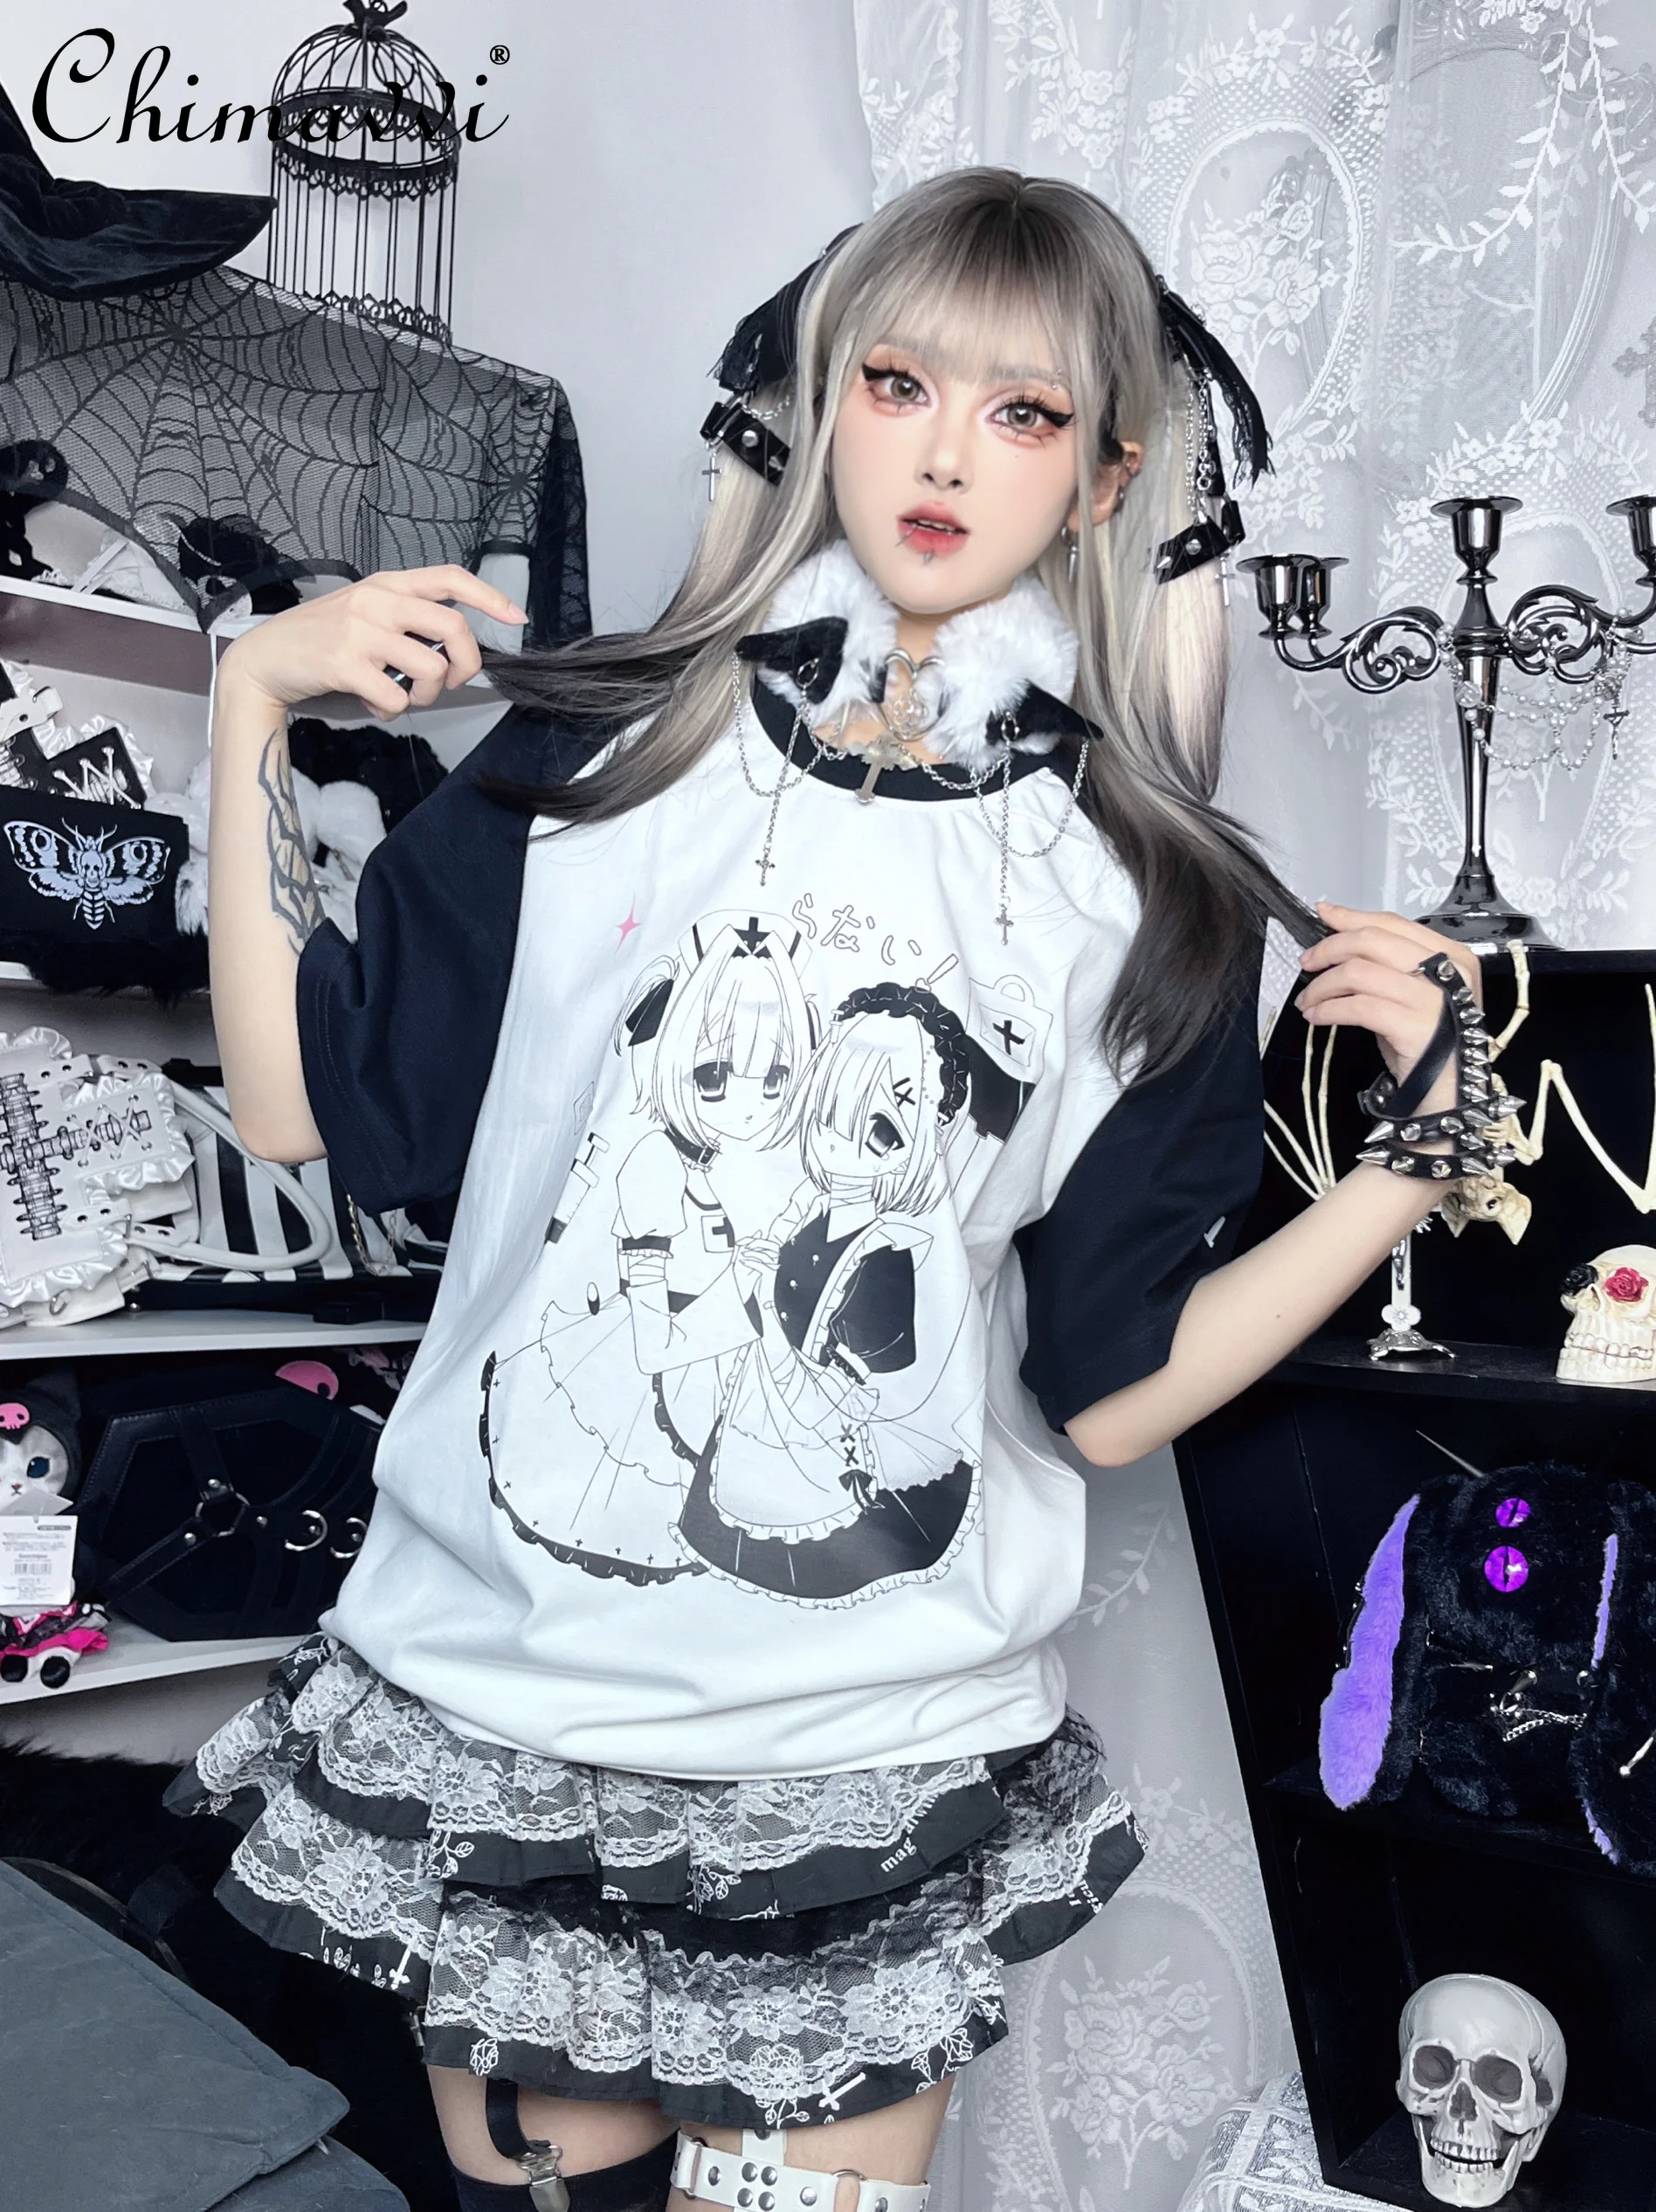 

Fashion Black and White Raglan Short Sleeve Subculture Printed T-shirt Summer New Round Neck Cotton T-shirt Girly Style Y2k Top